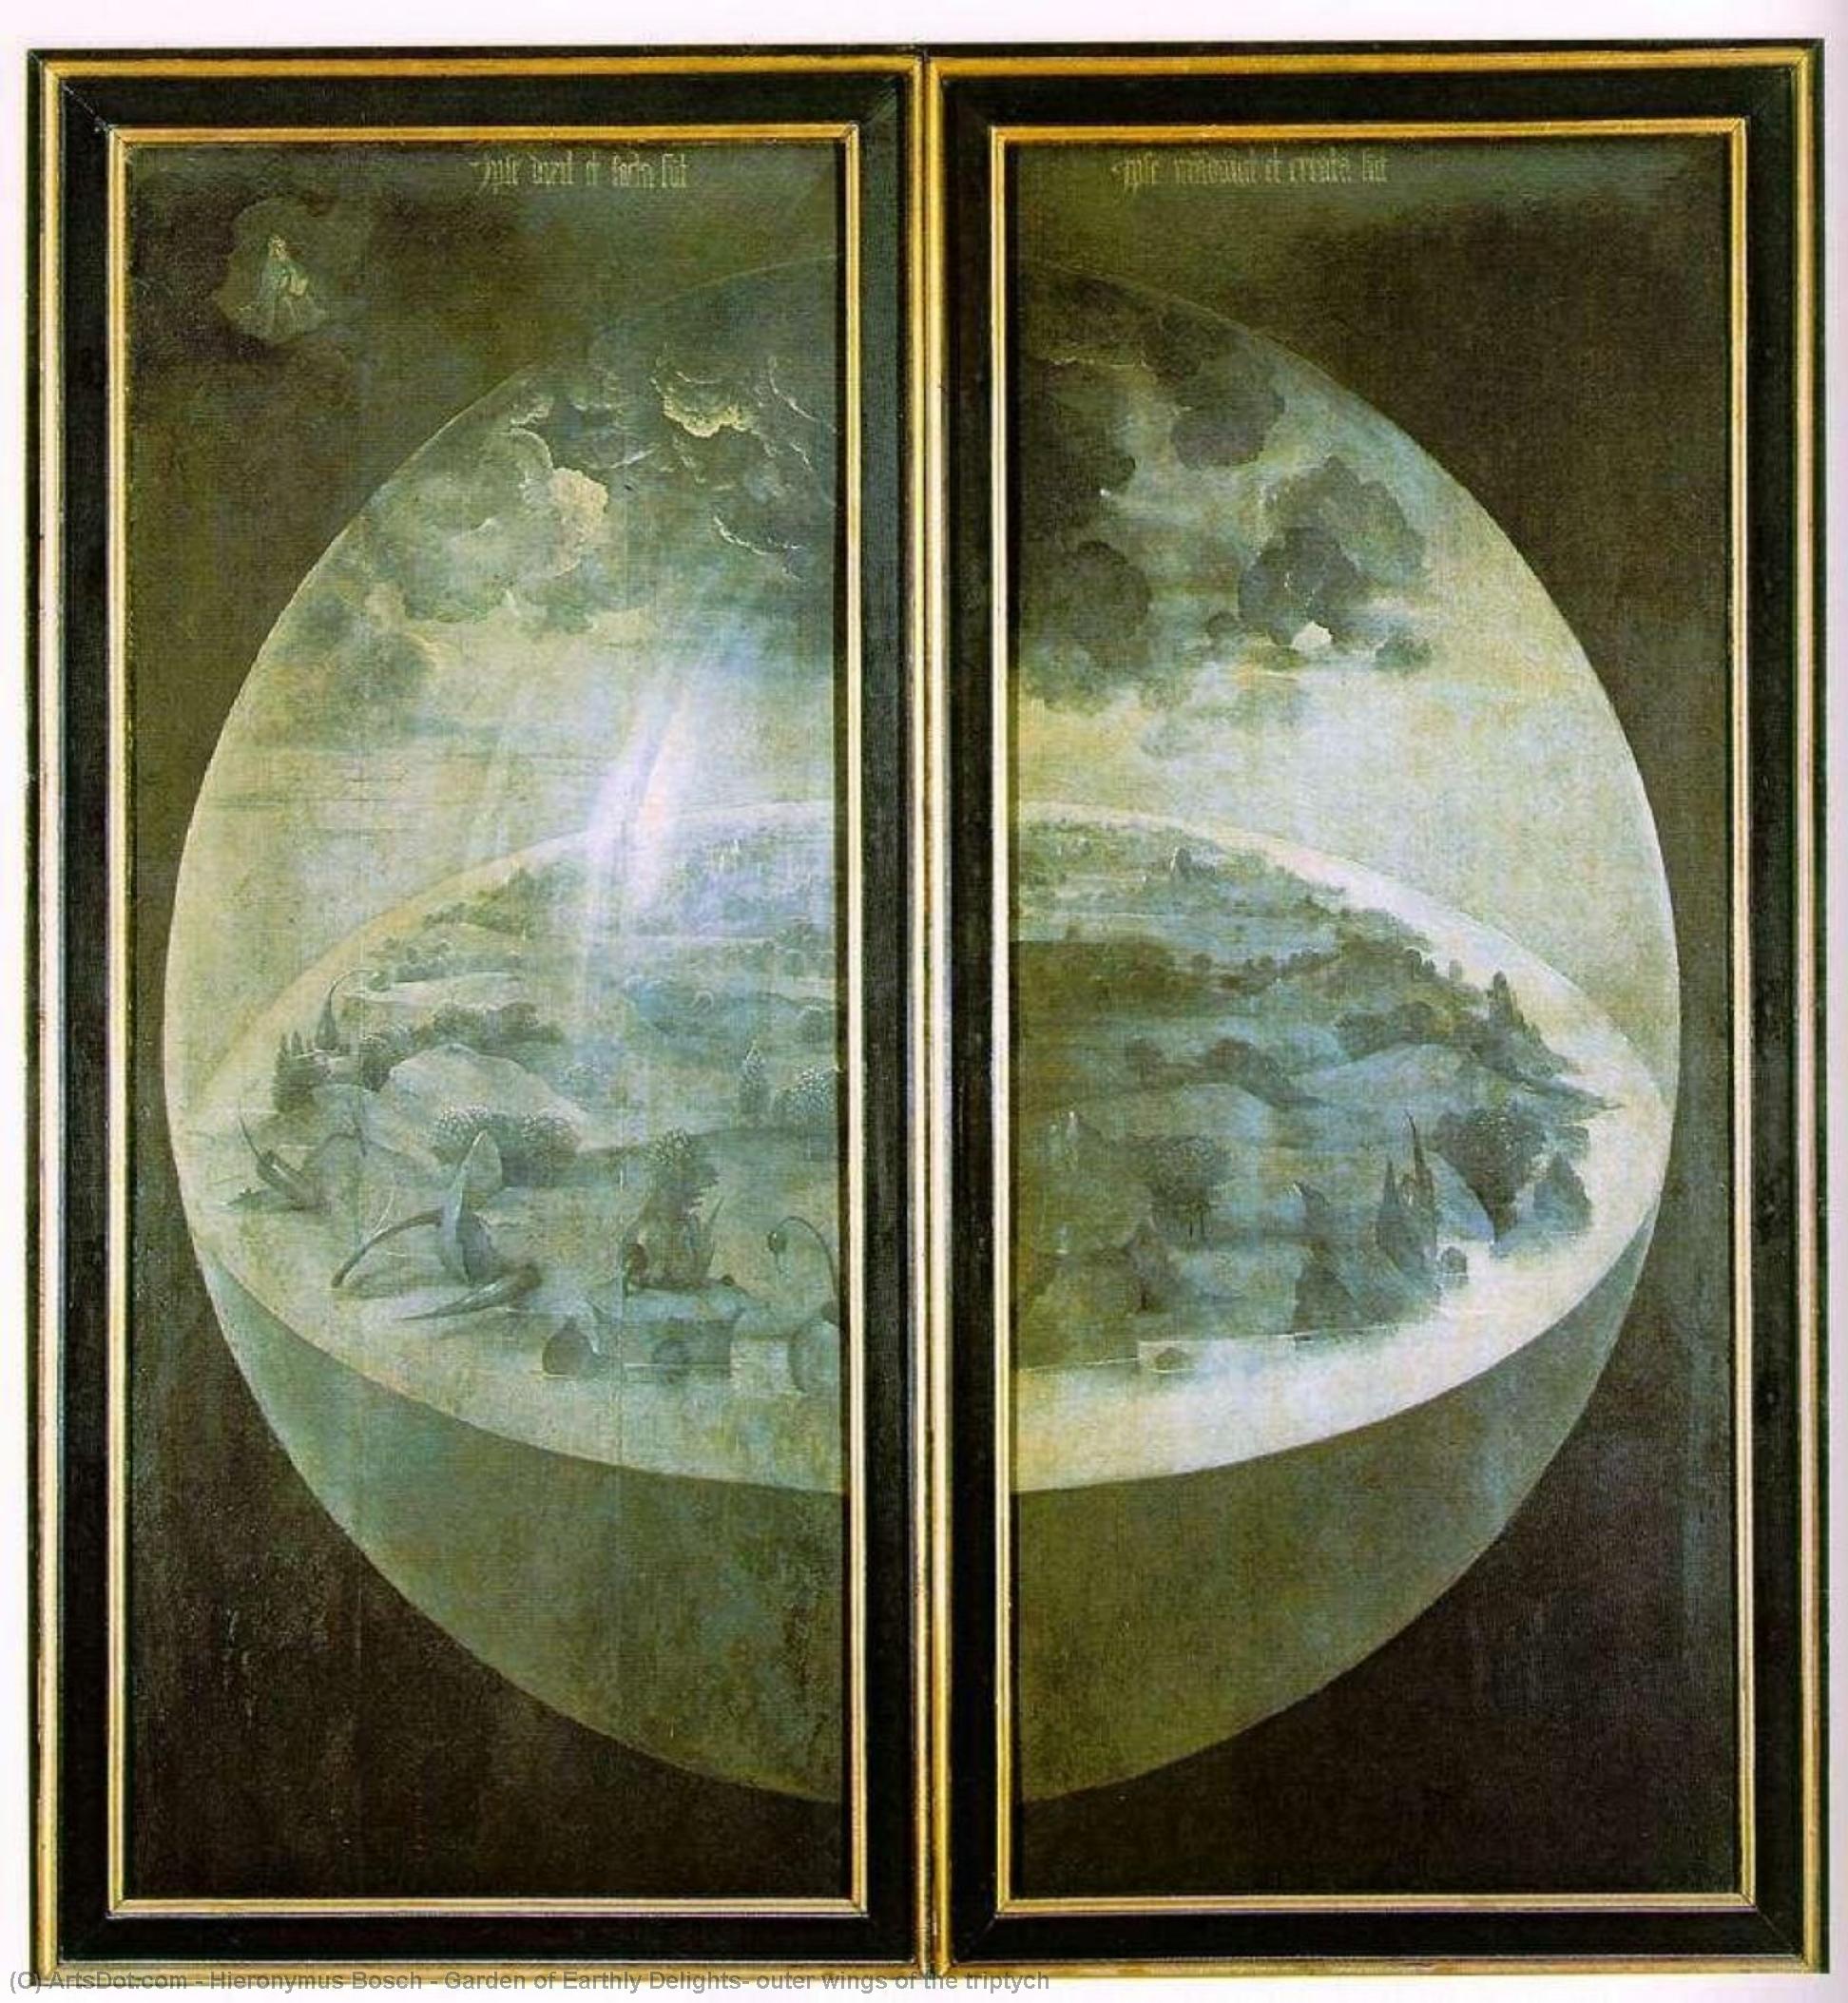 WikiOO.org - 백과 사전 - 회화, 삽화 Hieronymus Bosch - Garden of Earthly Delights, outer wings of the triptych